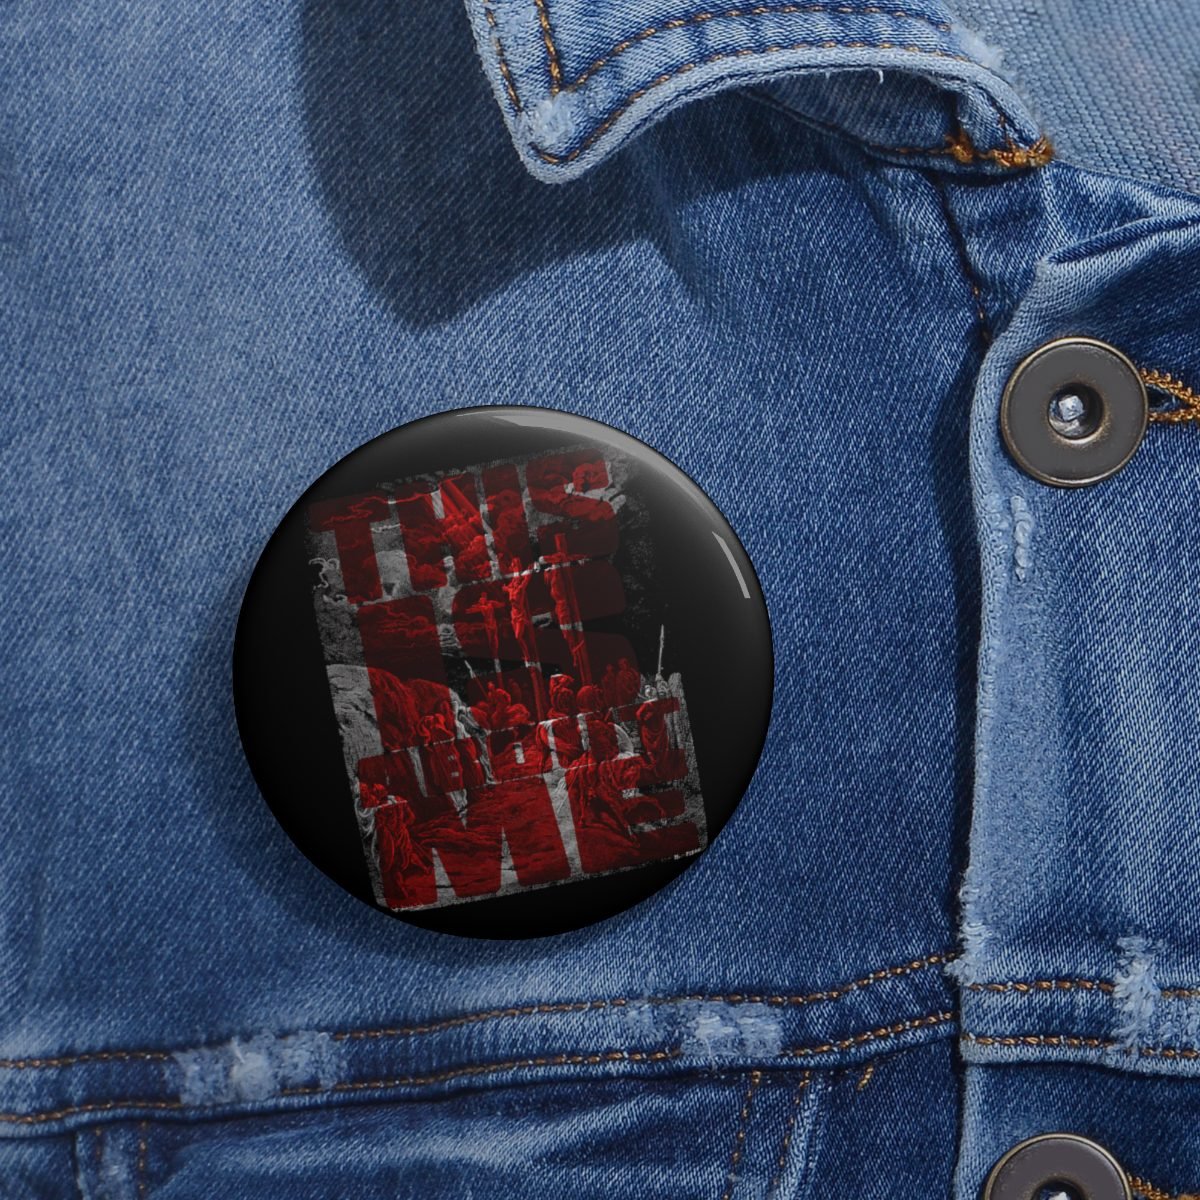 This Is About Me by Radical Truth Pin Buttons